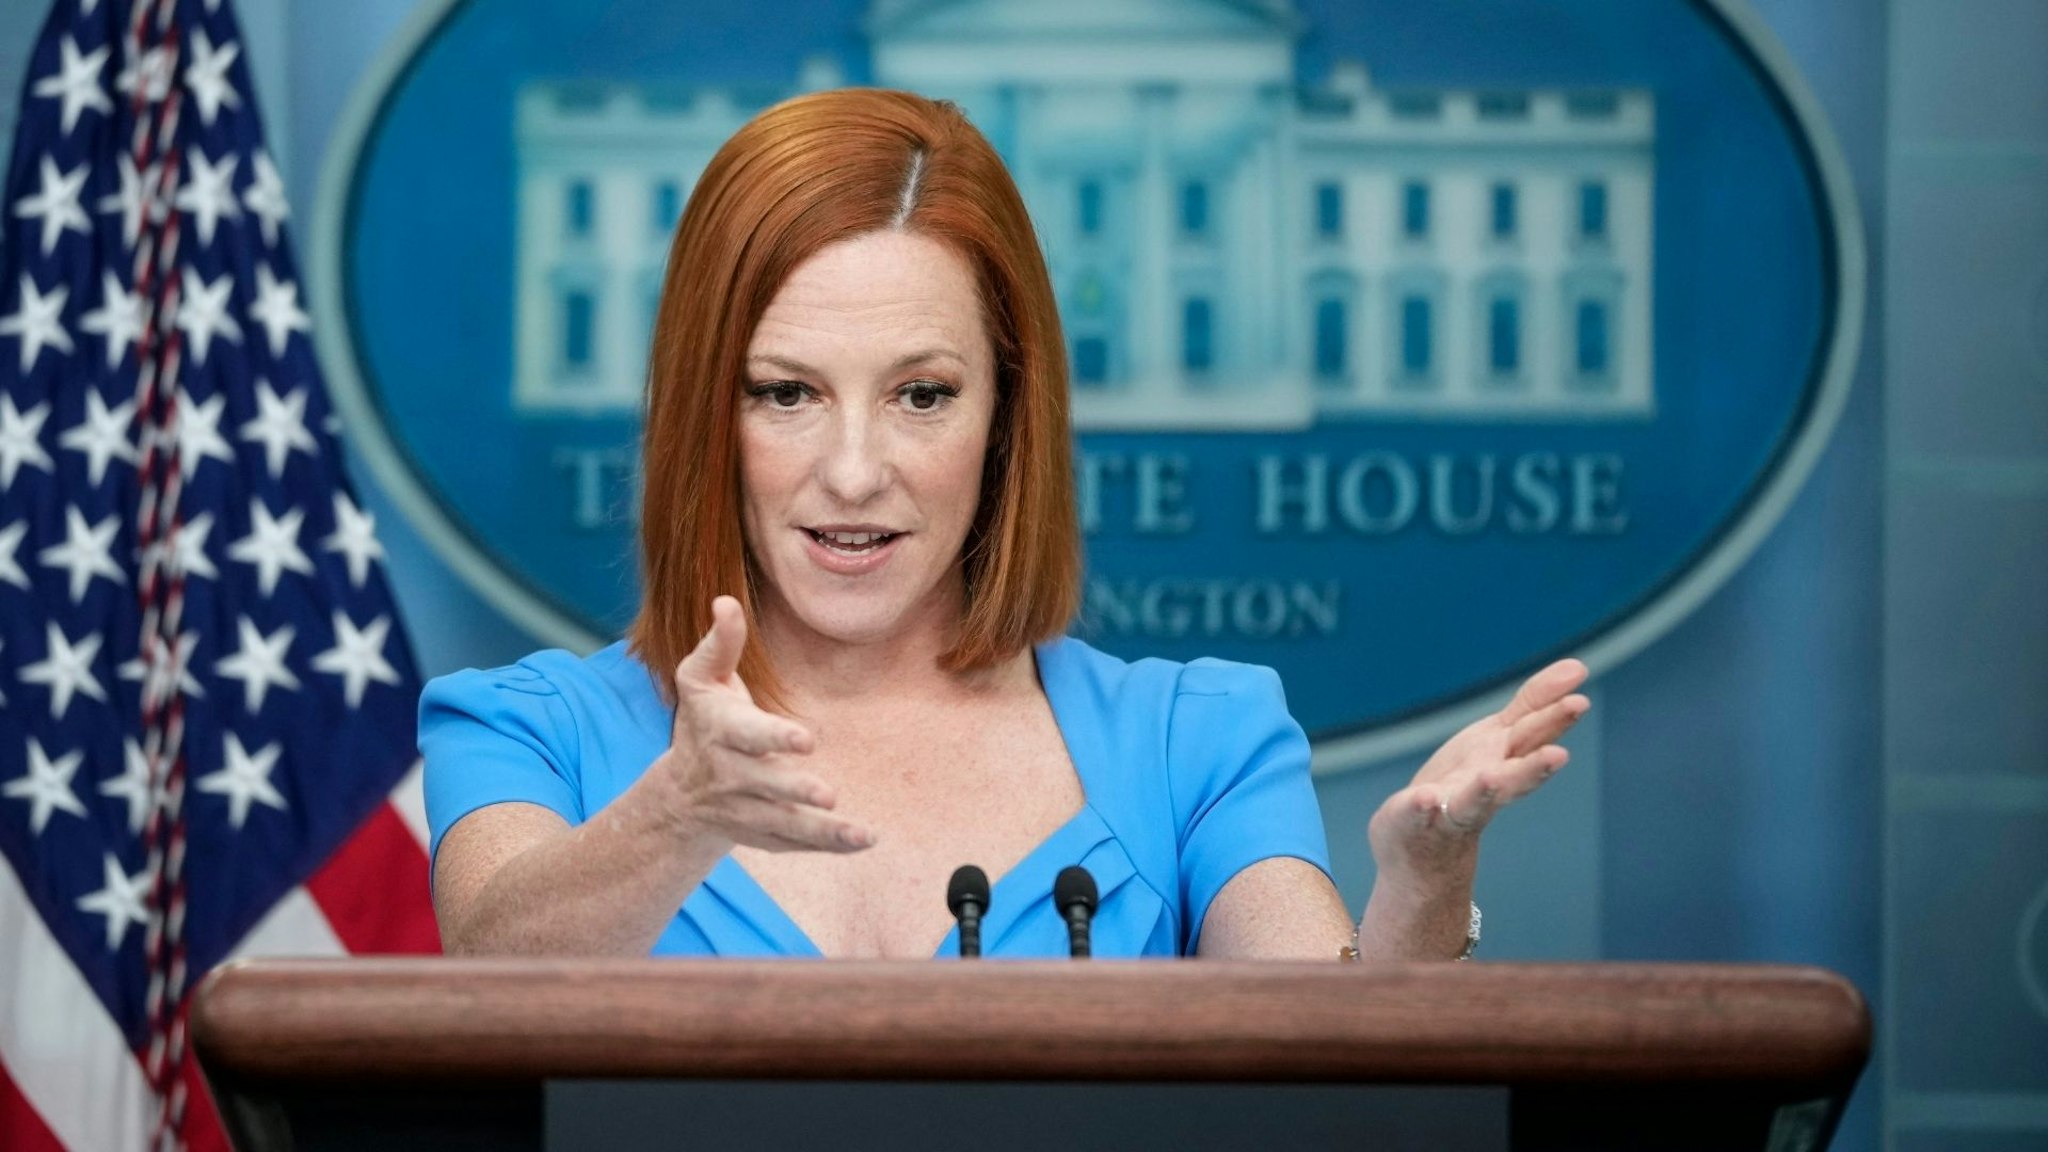 WASHINGTON, DC - MAY 12: White House Press Secretary Jen Psaki speaks during the daily press briefing at the White House on May 12, 2022 in Washington, DC. Psaki fielded several questions about the White Houses response to the recent baby formula shortage, which experts say is the worst shortage in decades.